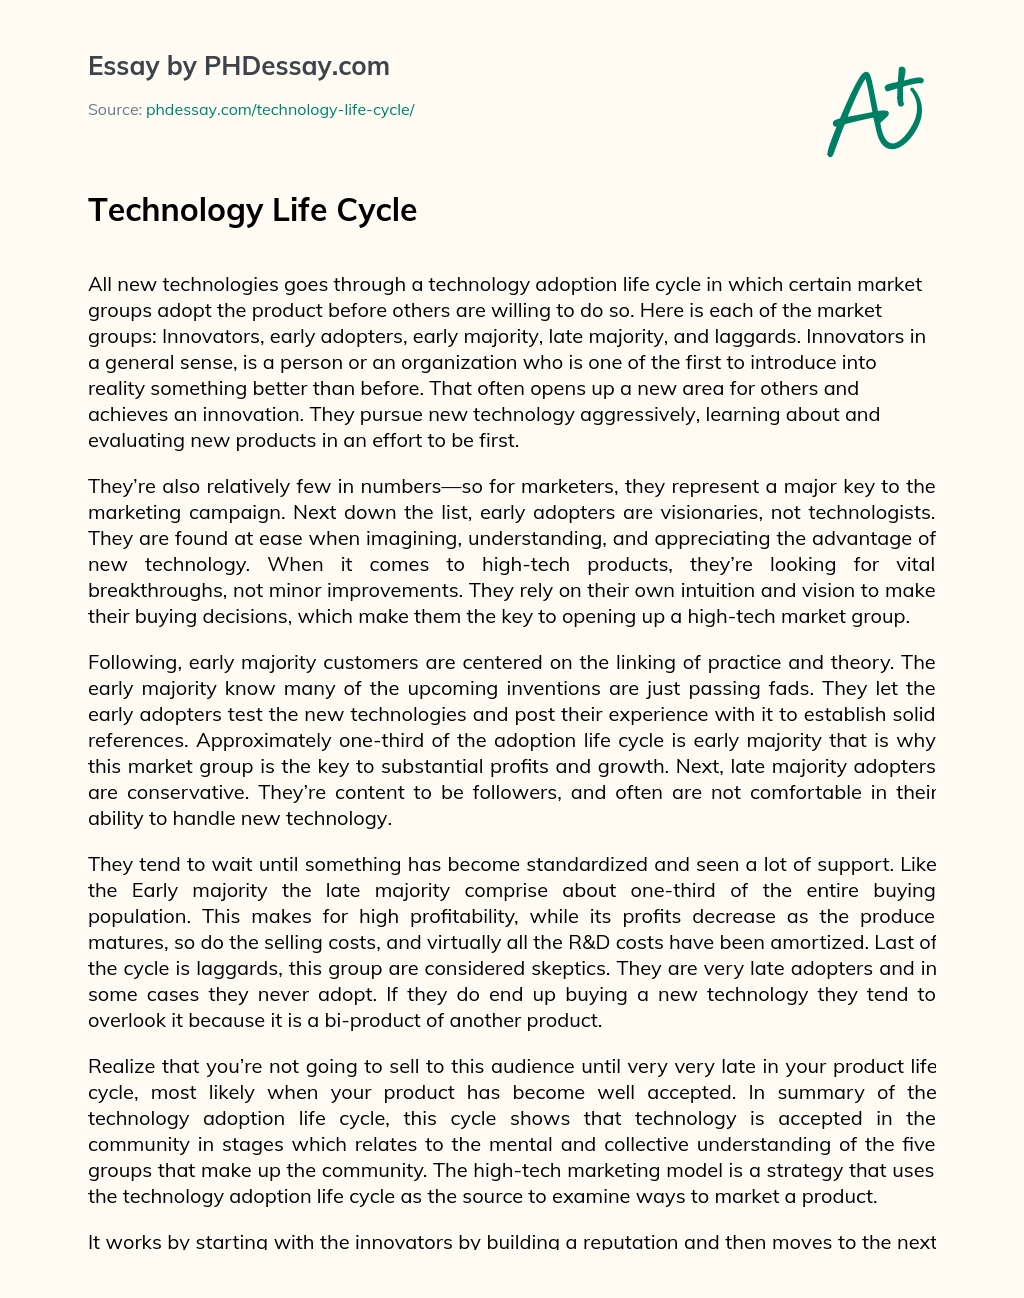 Technology Life Cycle essay